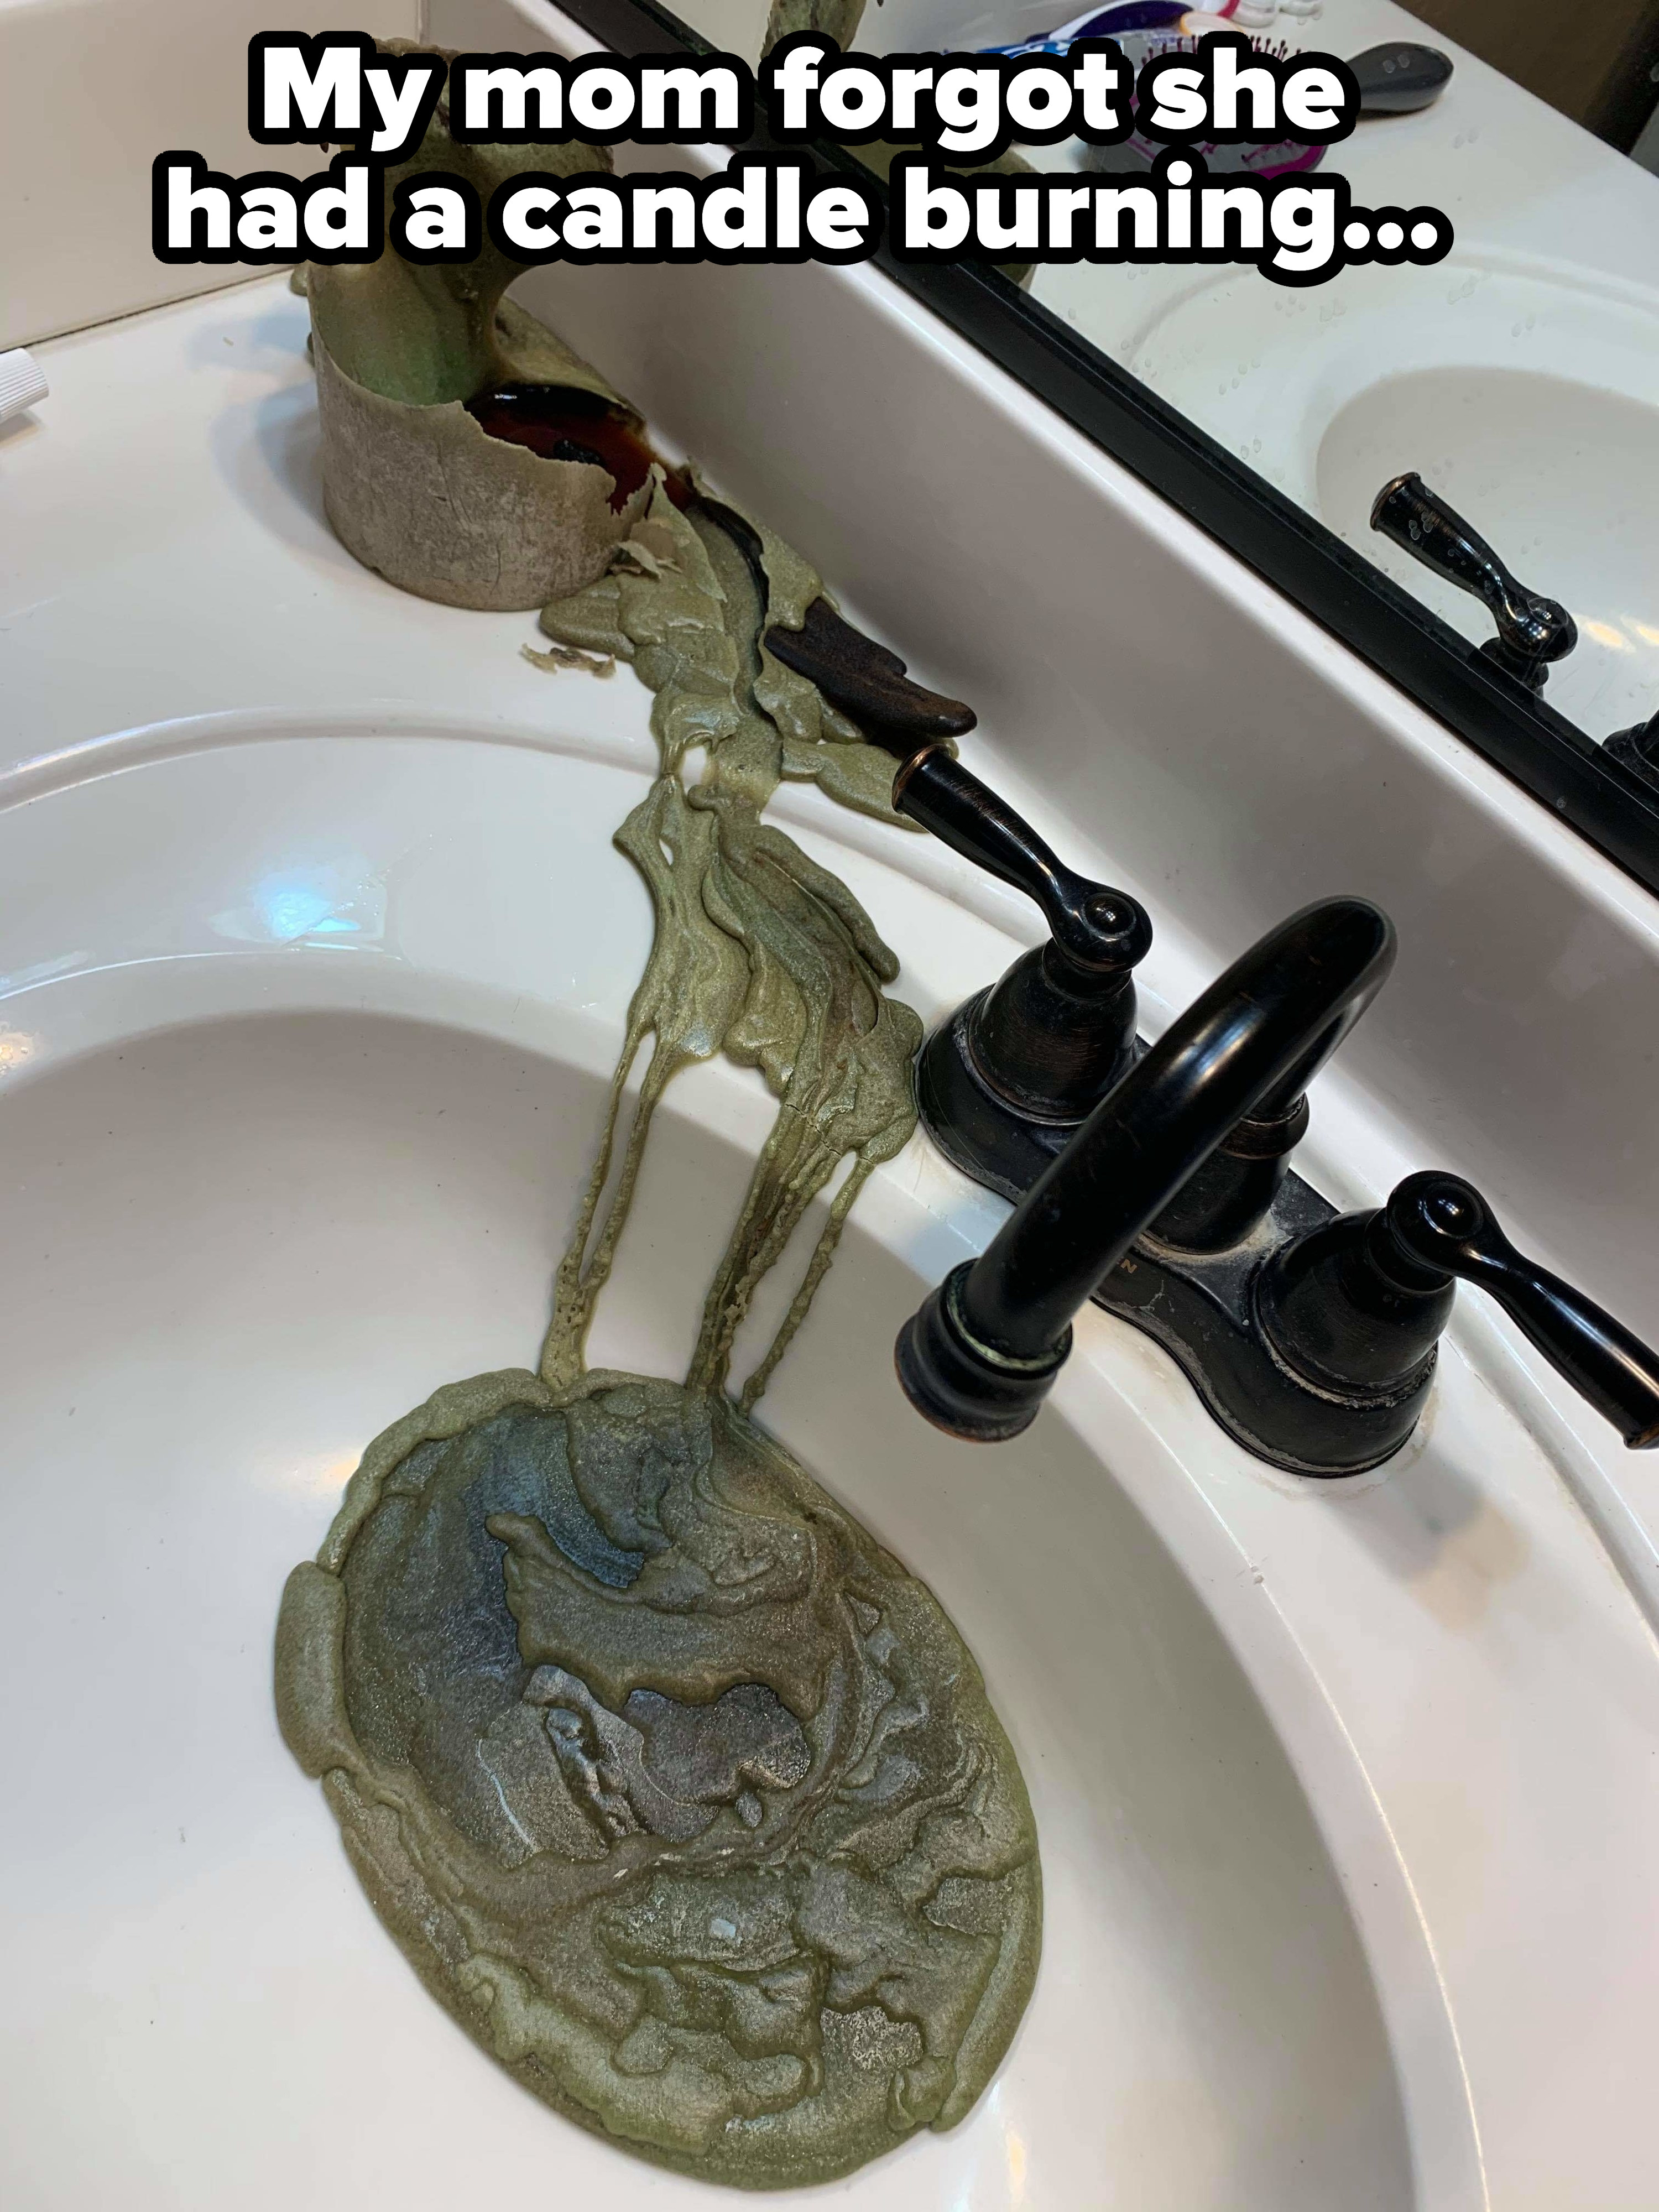 Melted candle wax in a bathroom sink